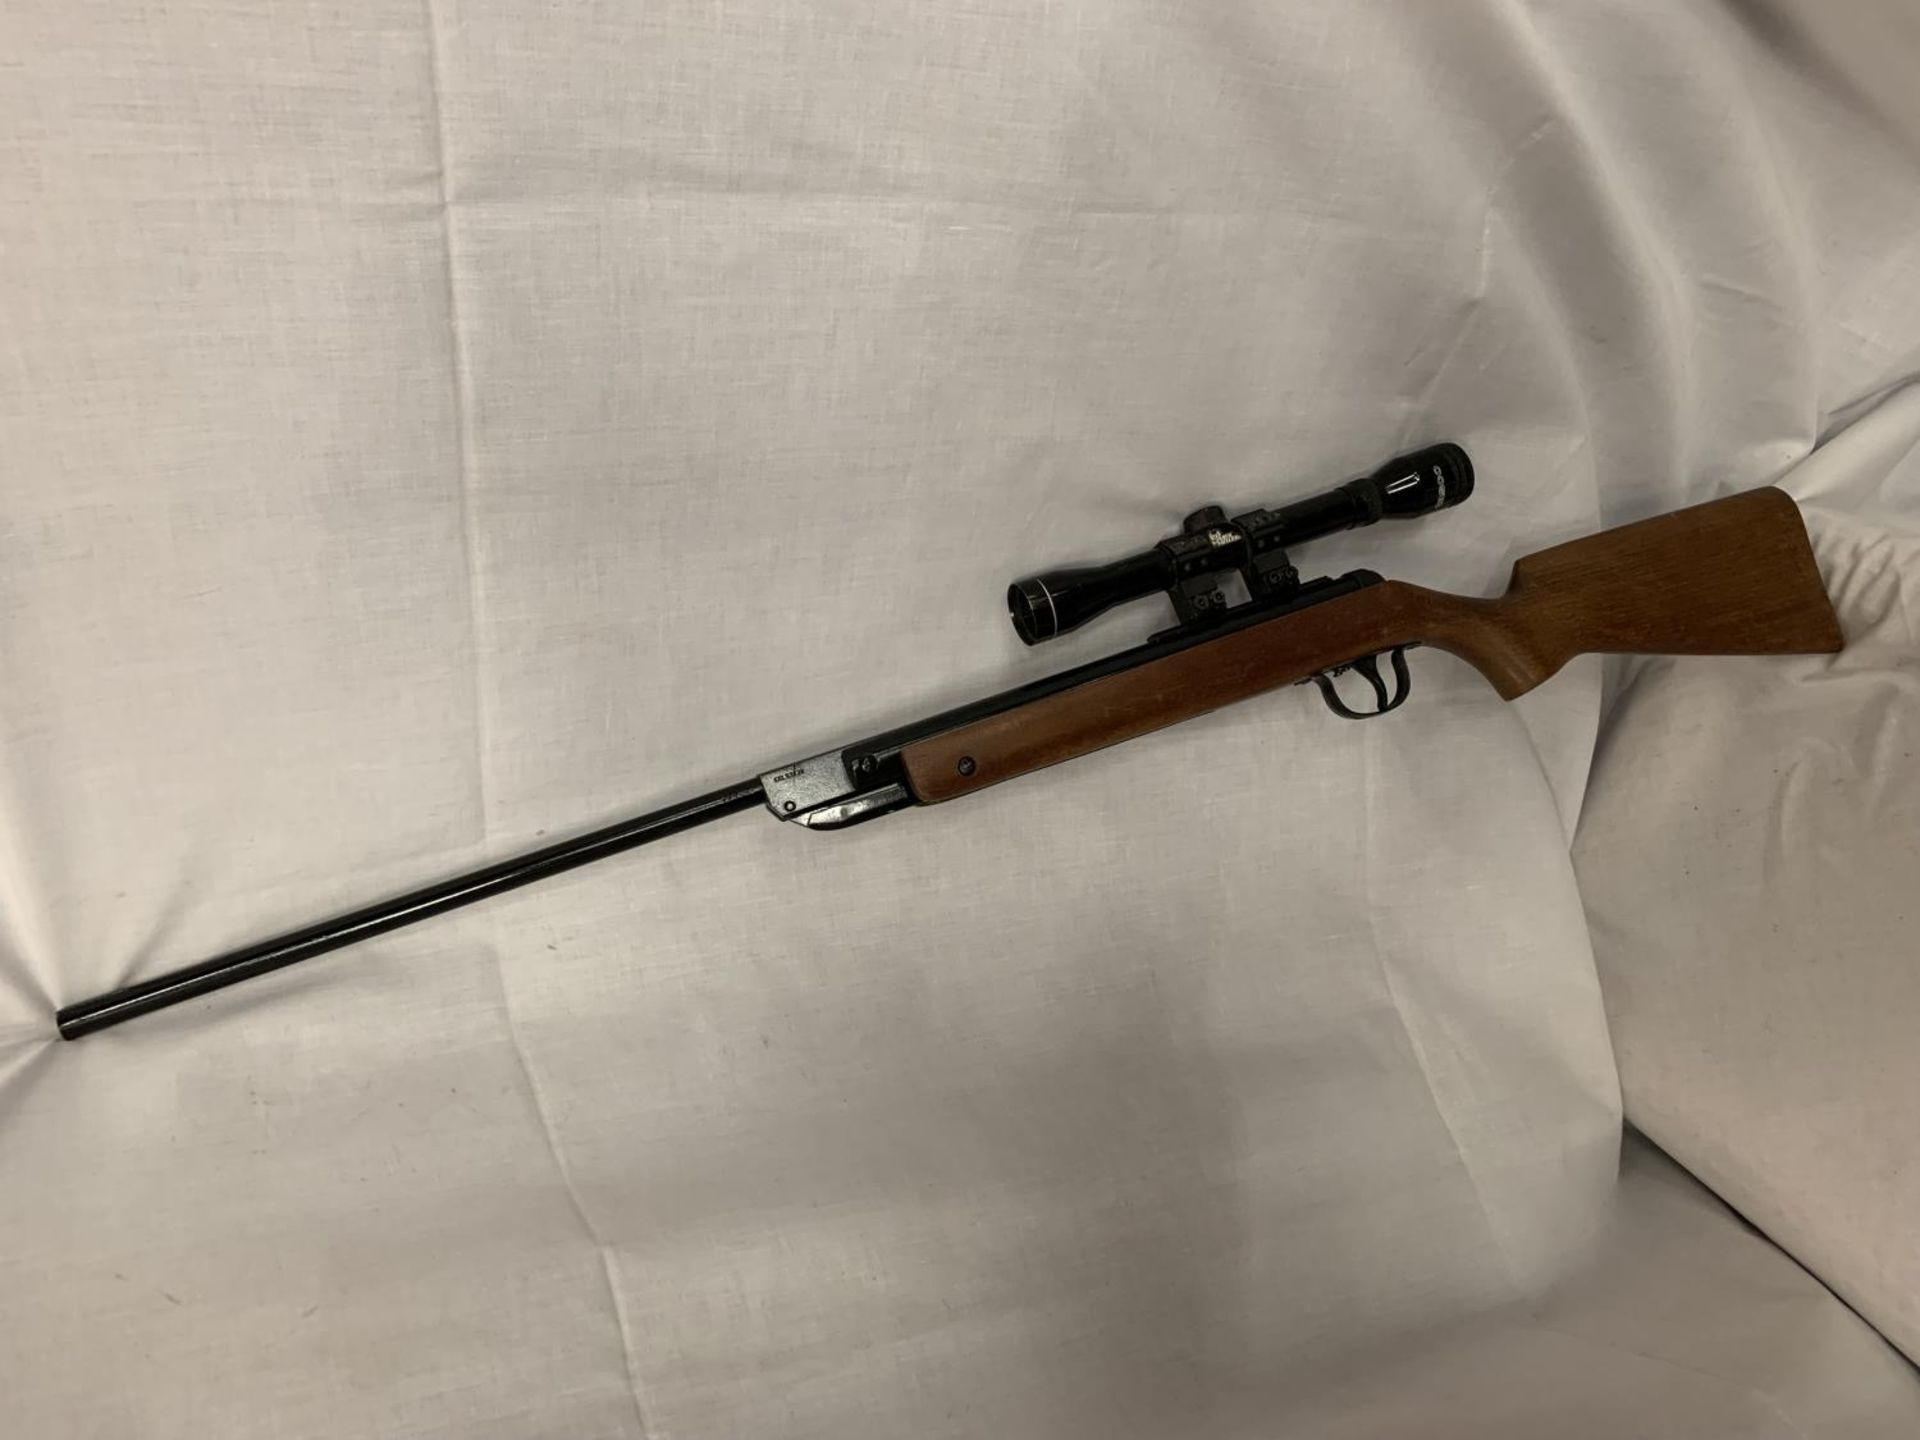 A DIANA AIR RIFLE WITH SCOPE